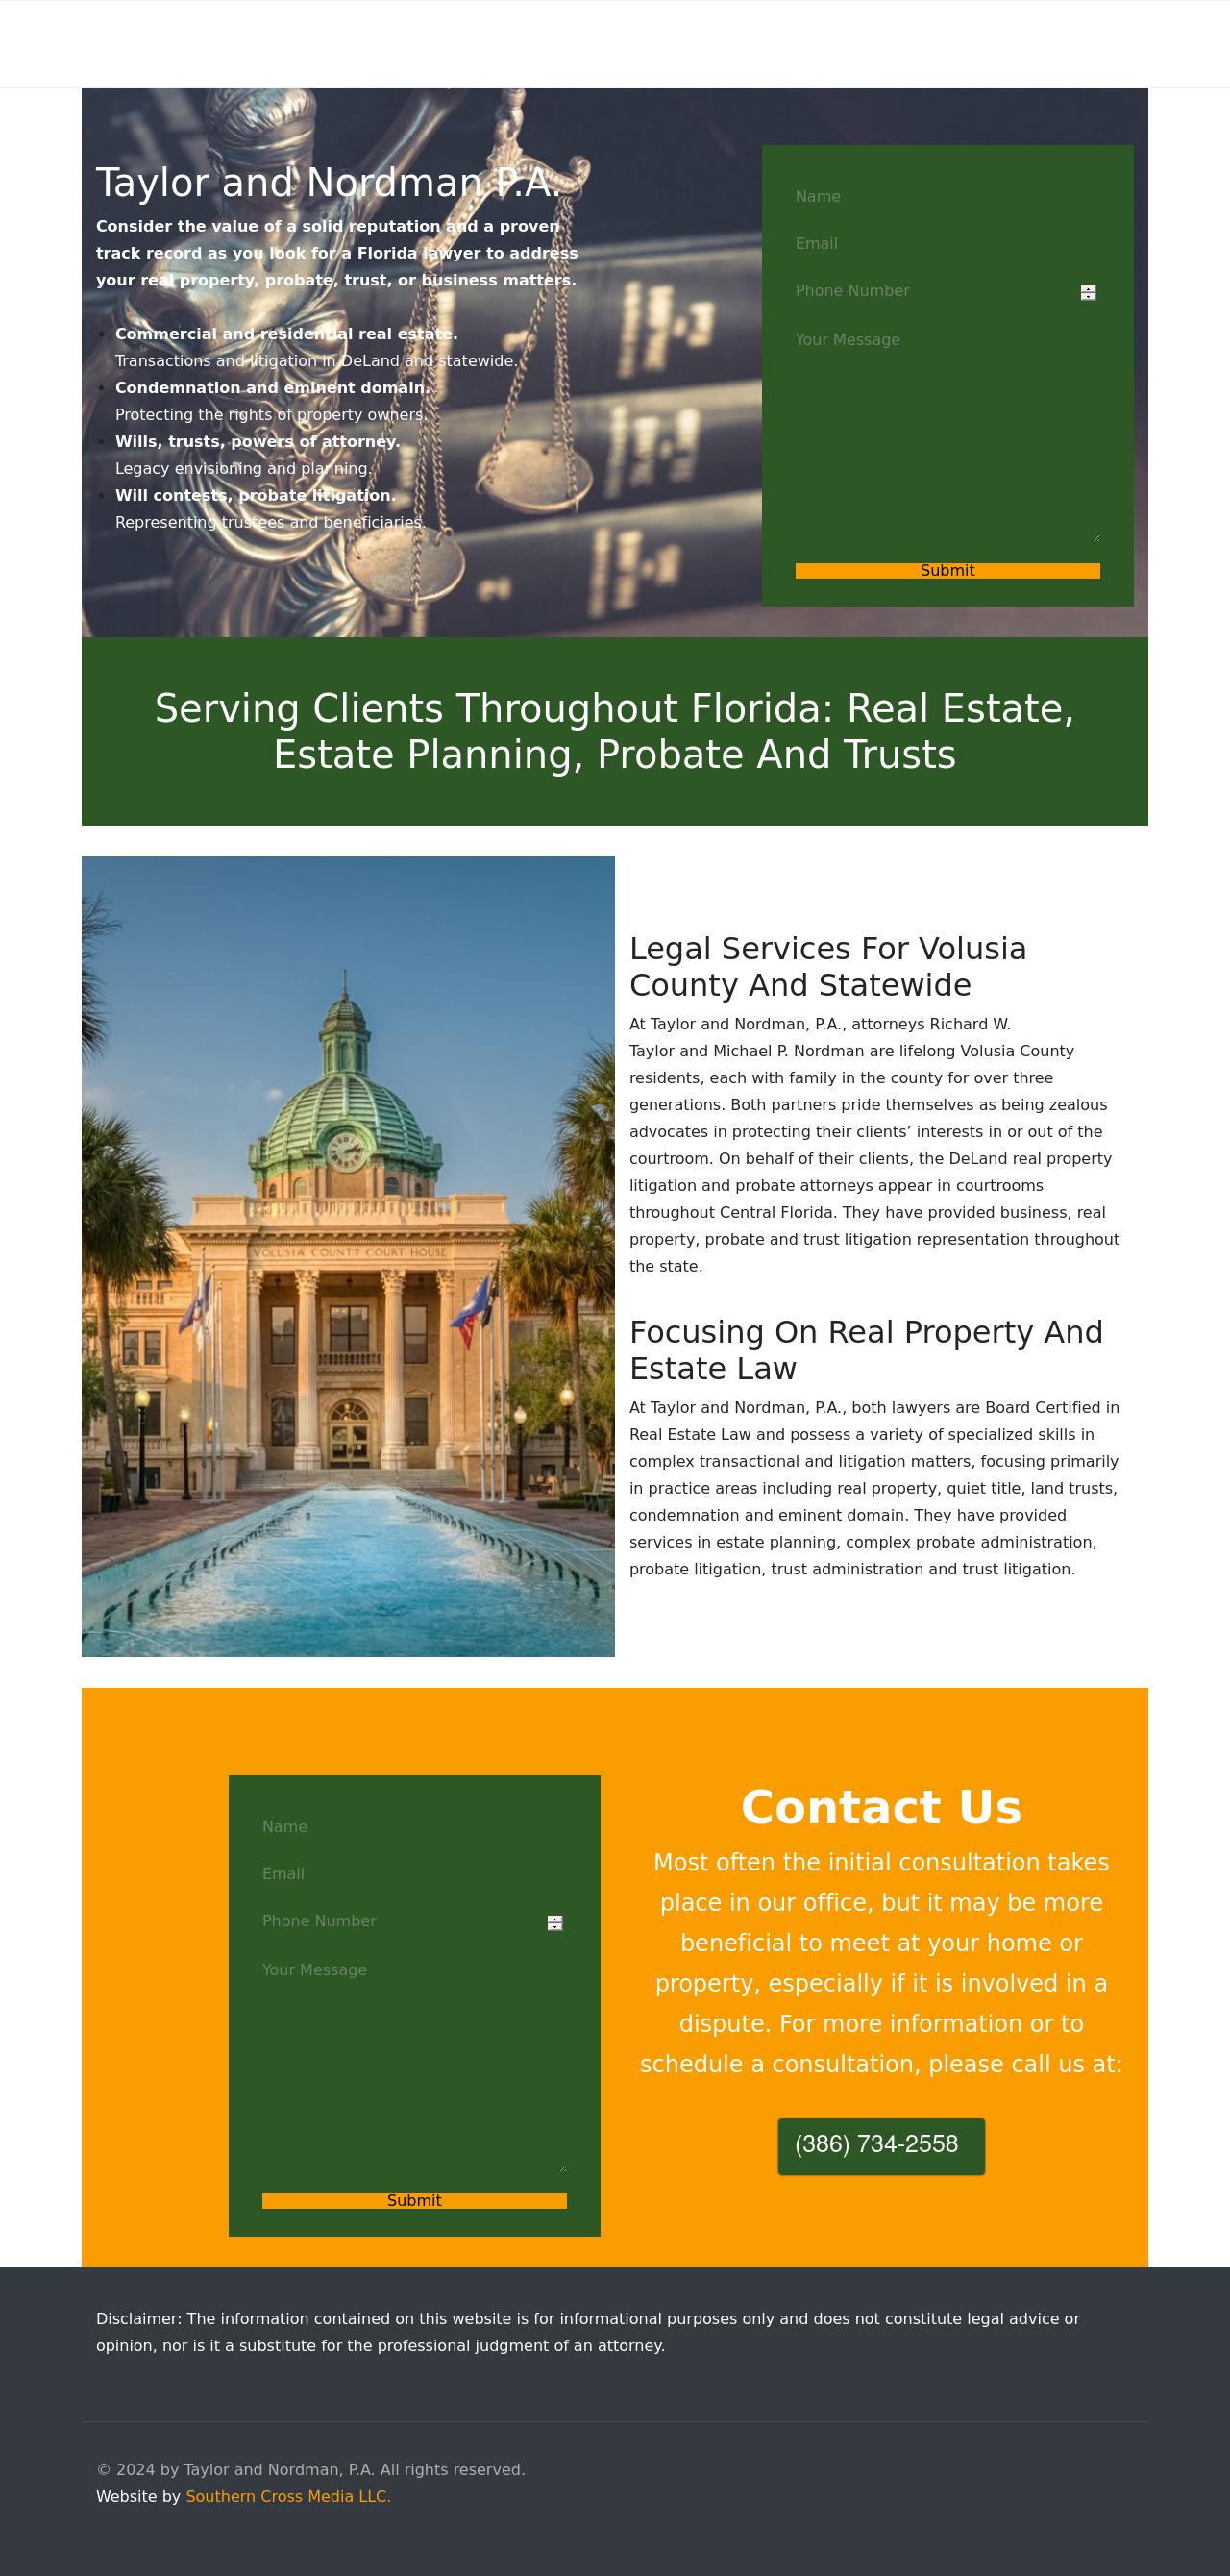 Taylor and Nordman, P.A. - Deland FL Lawyers